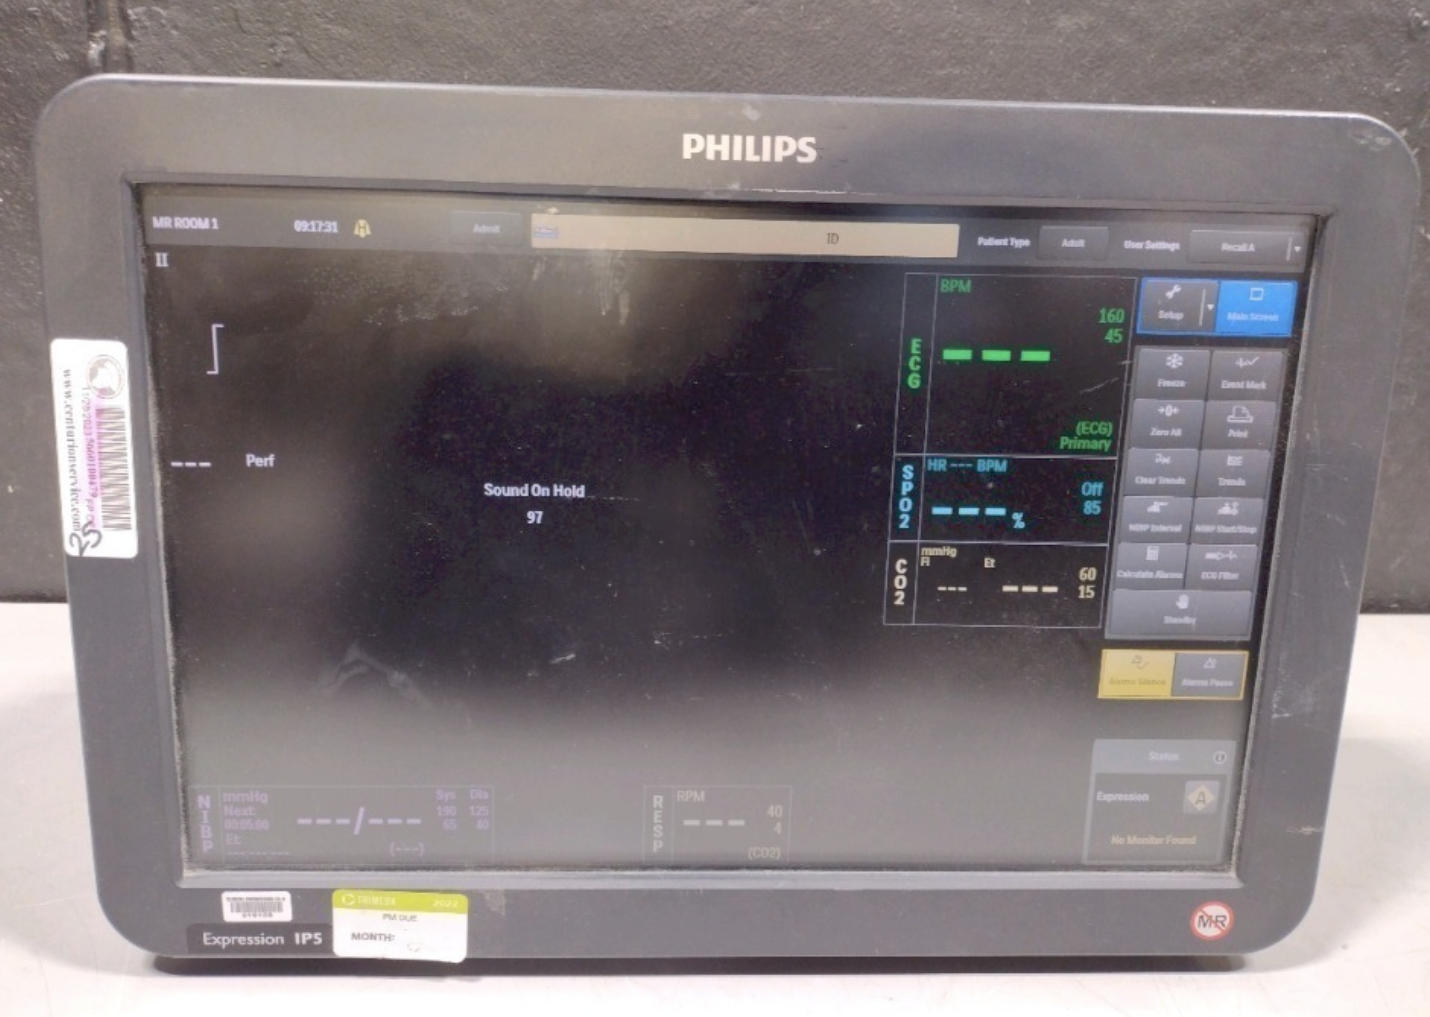 PHILIPS EXPRESSION IP5 PATIENT MONITOR DIAGNOSTIC ULTRASOUND MACHINES FOR SALE